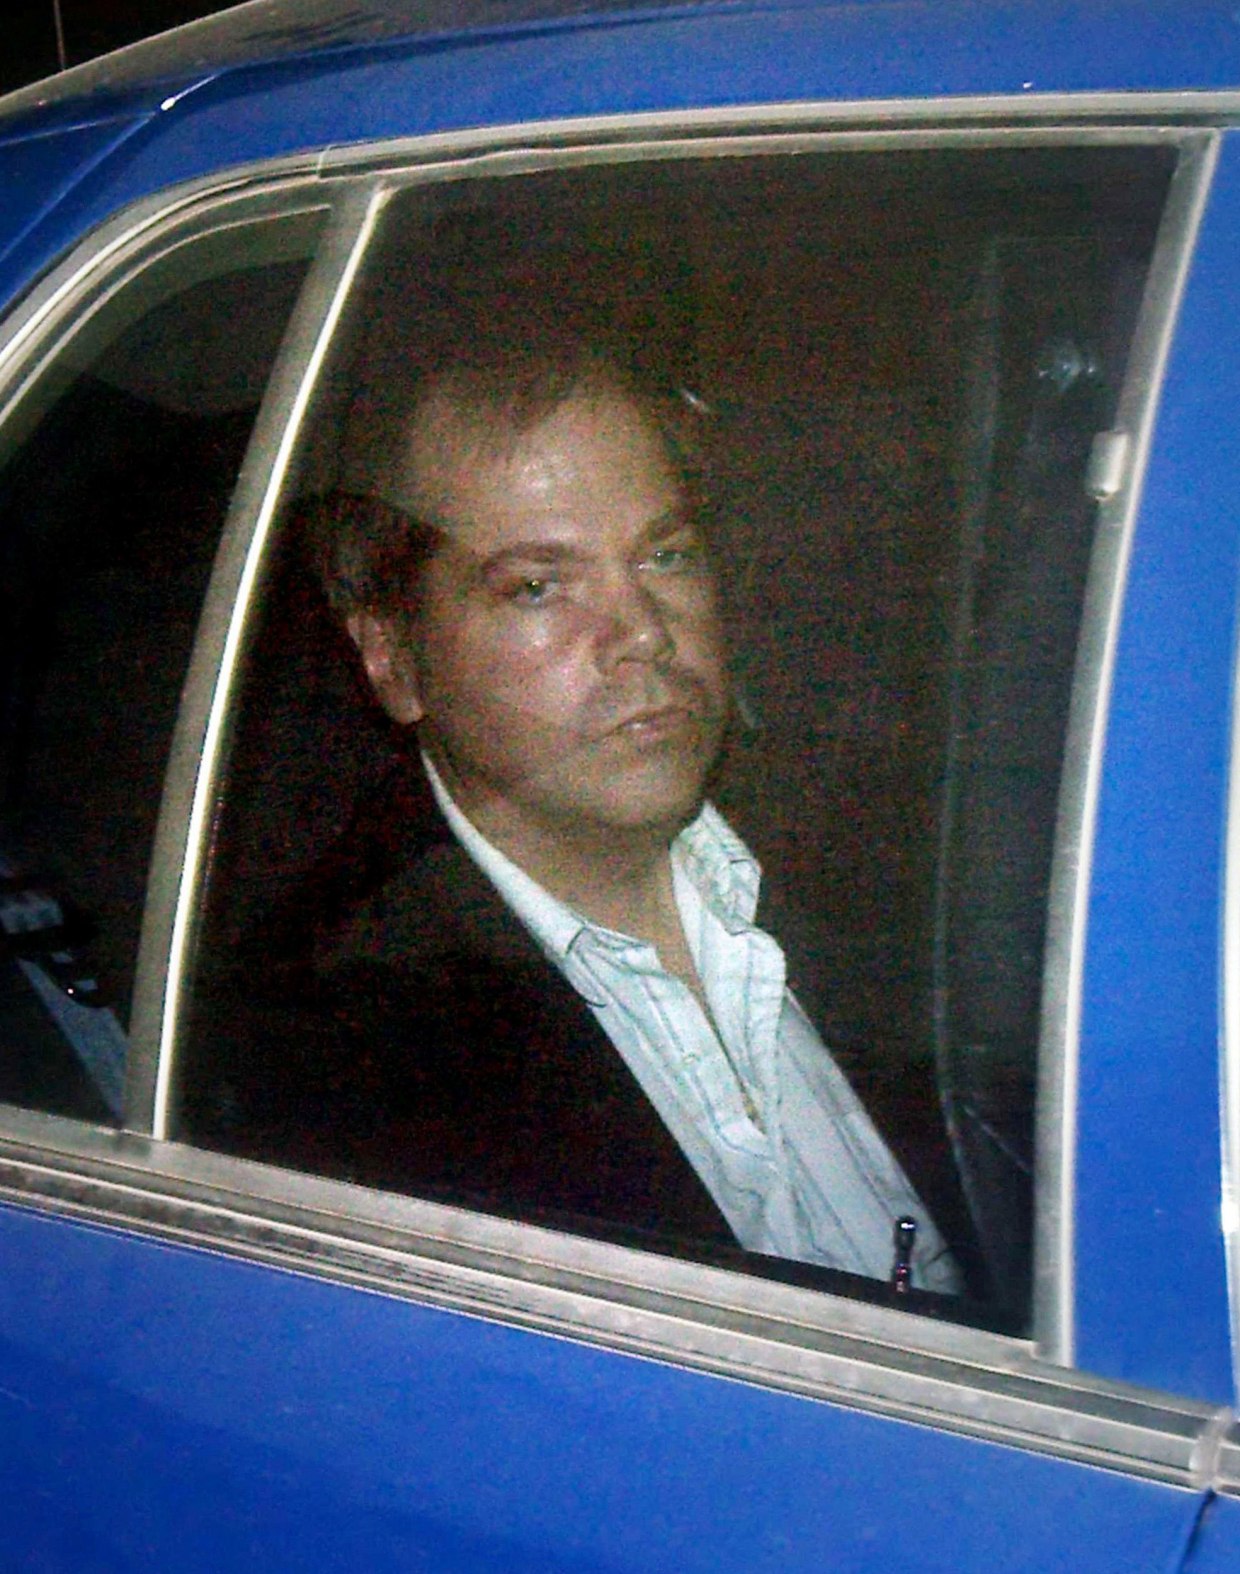 John Hinckley, Who Tried to Assassinate Ronald Reagan, Can Now Share His Art  With the World, a Judge Rules